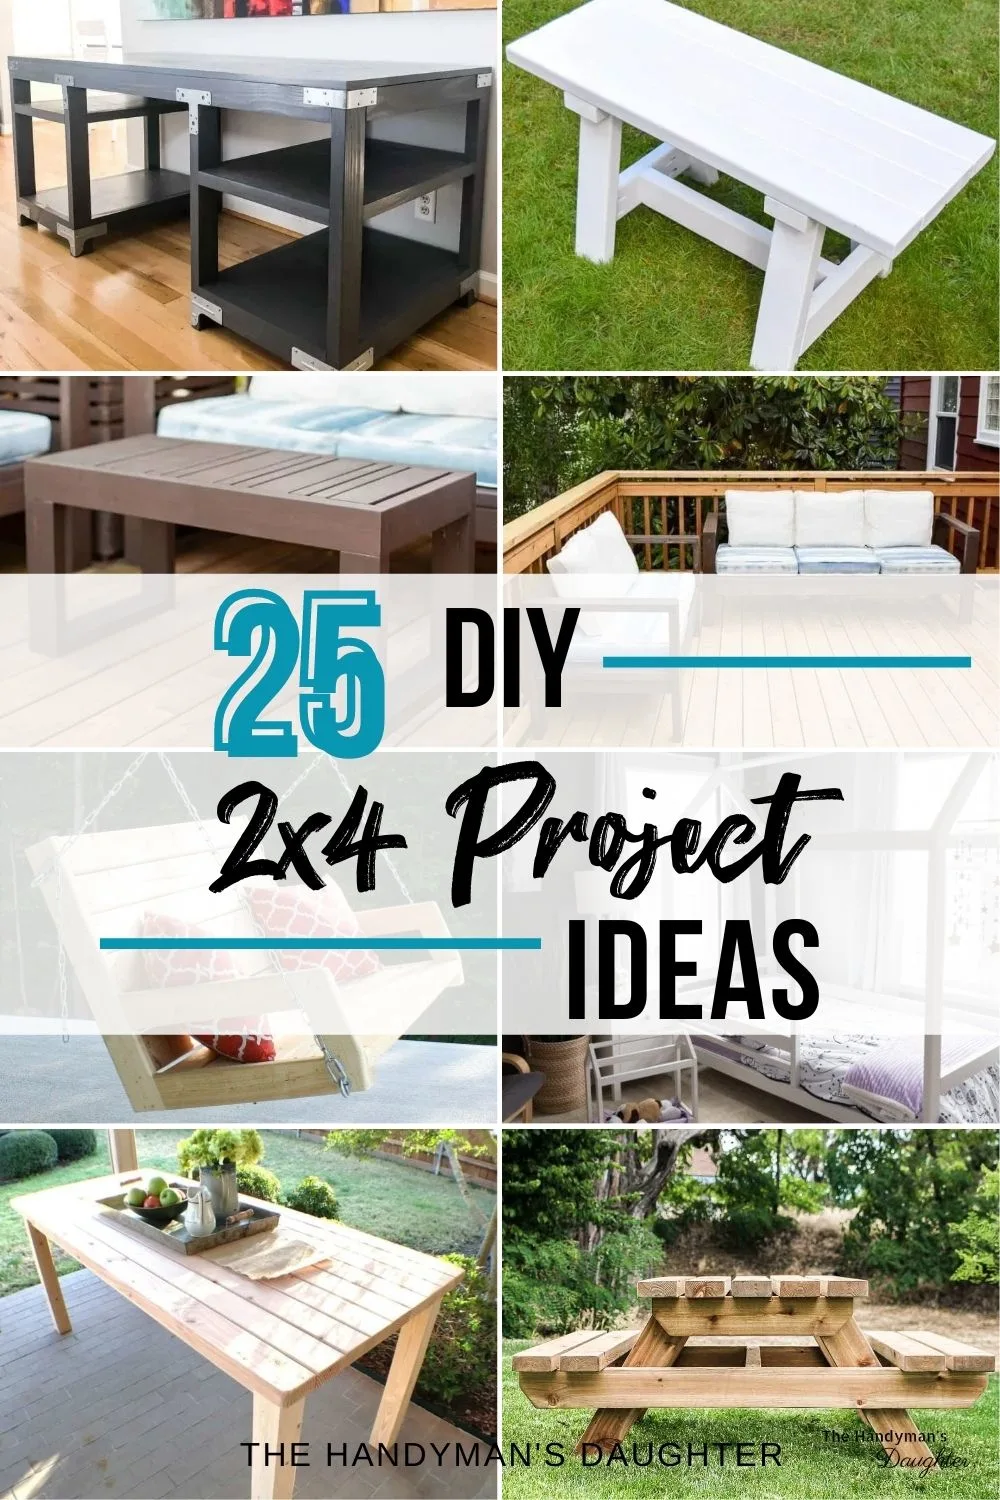 2x4 Furniture: Simple, Inexpensive and Great-Looking Projects You Can Make [Book]